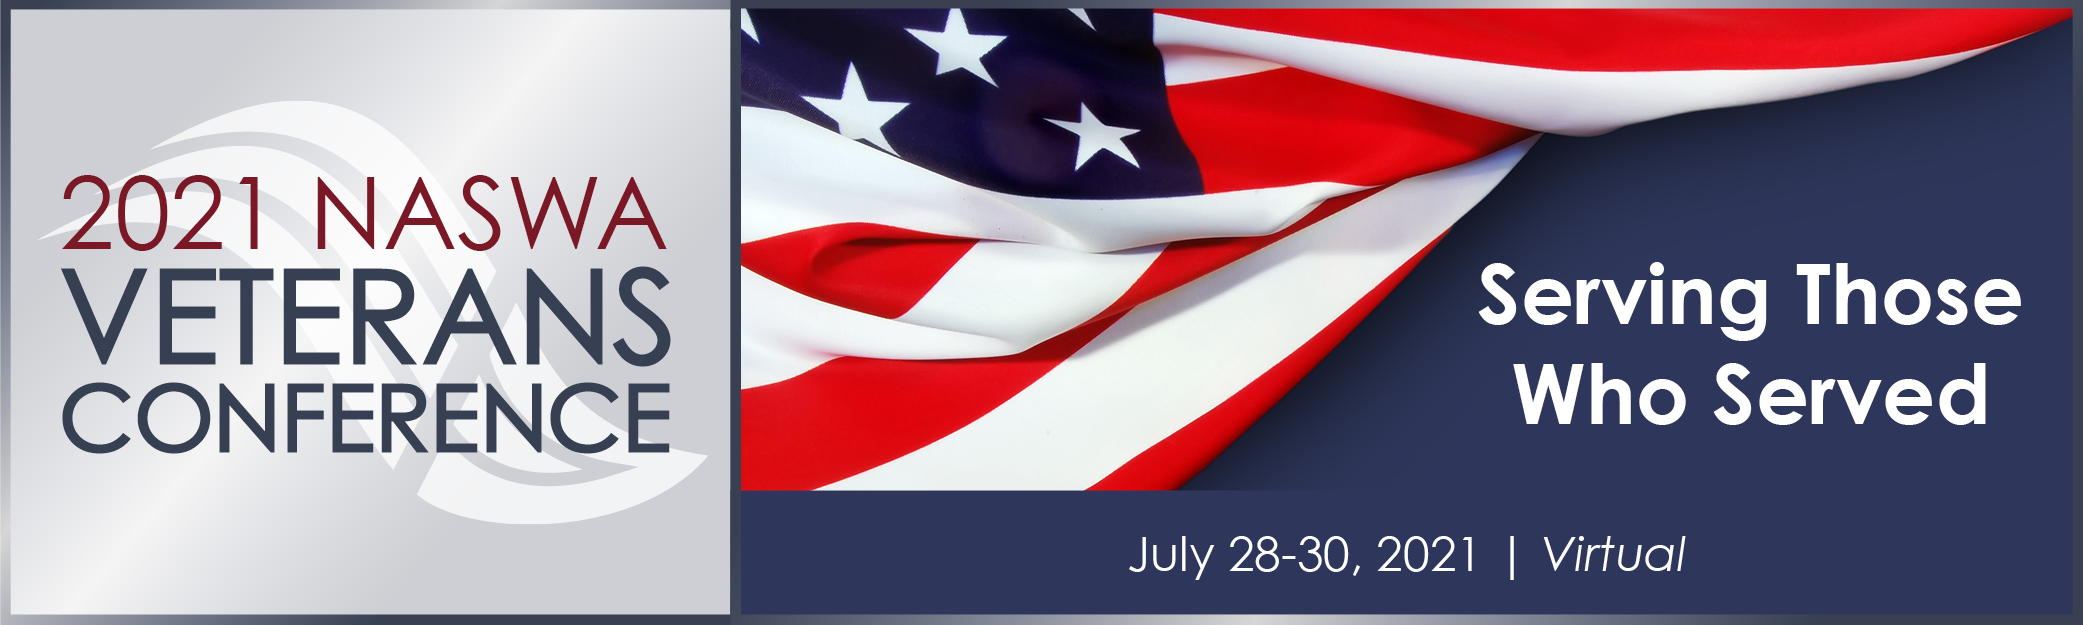 2021 NASWA Veterans Conference - American Flag on blue background with text "Serving Those Who Served | July 28-30, 2021"